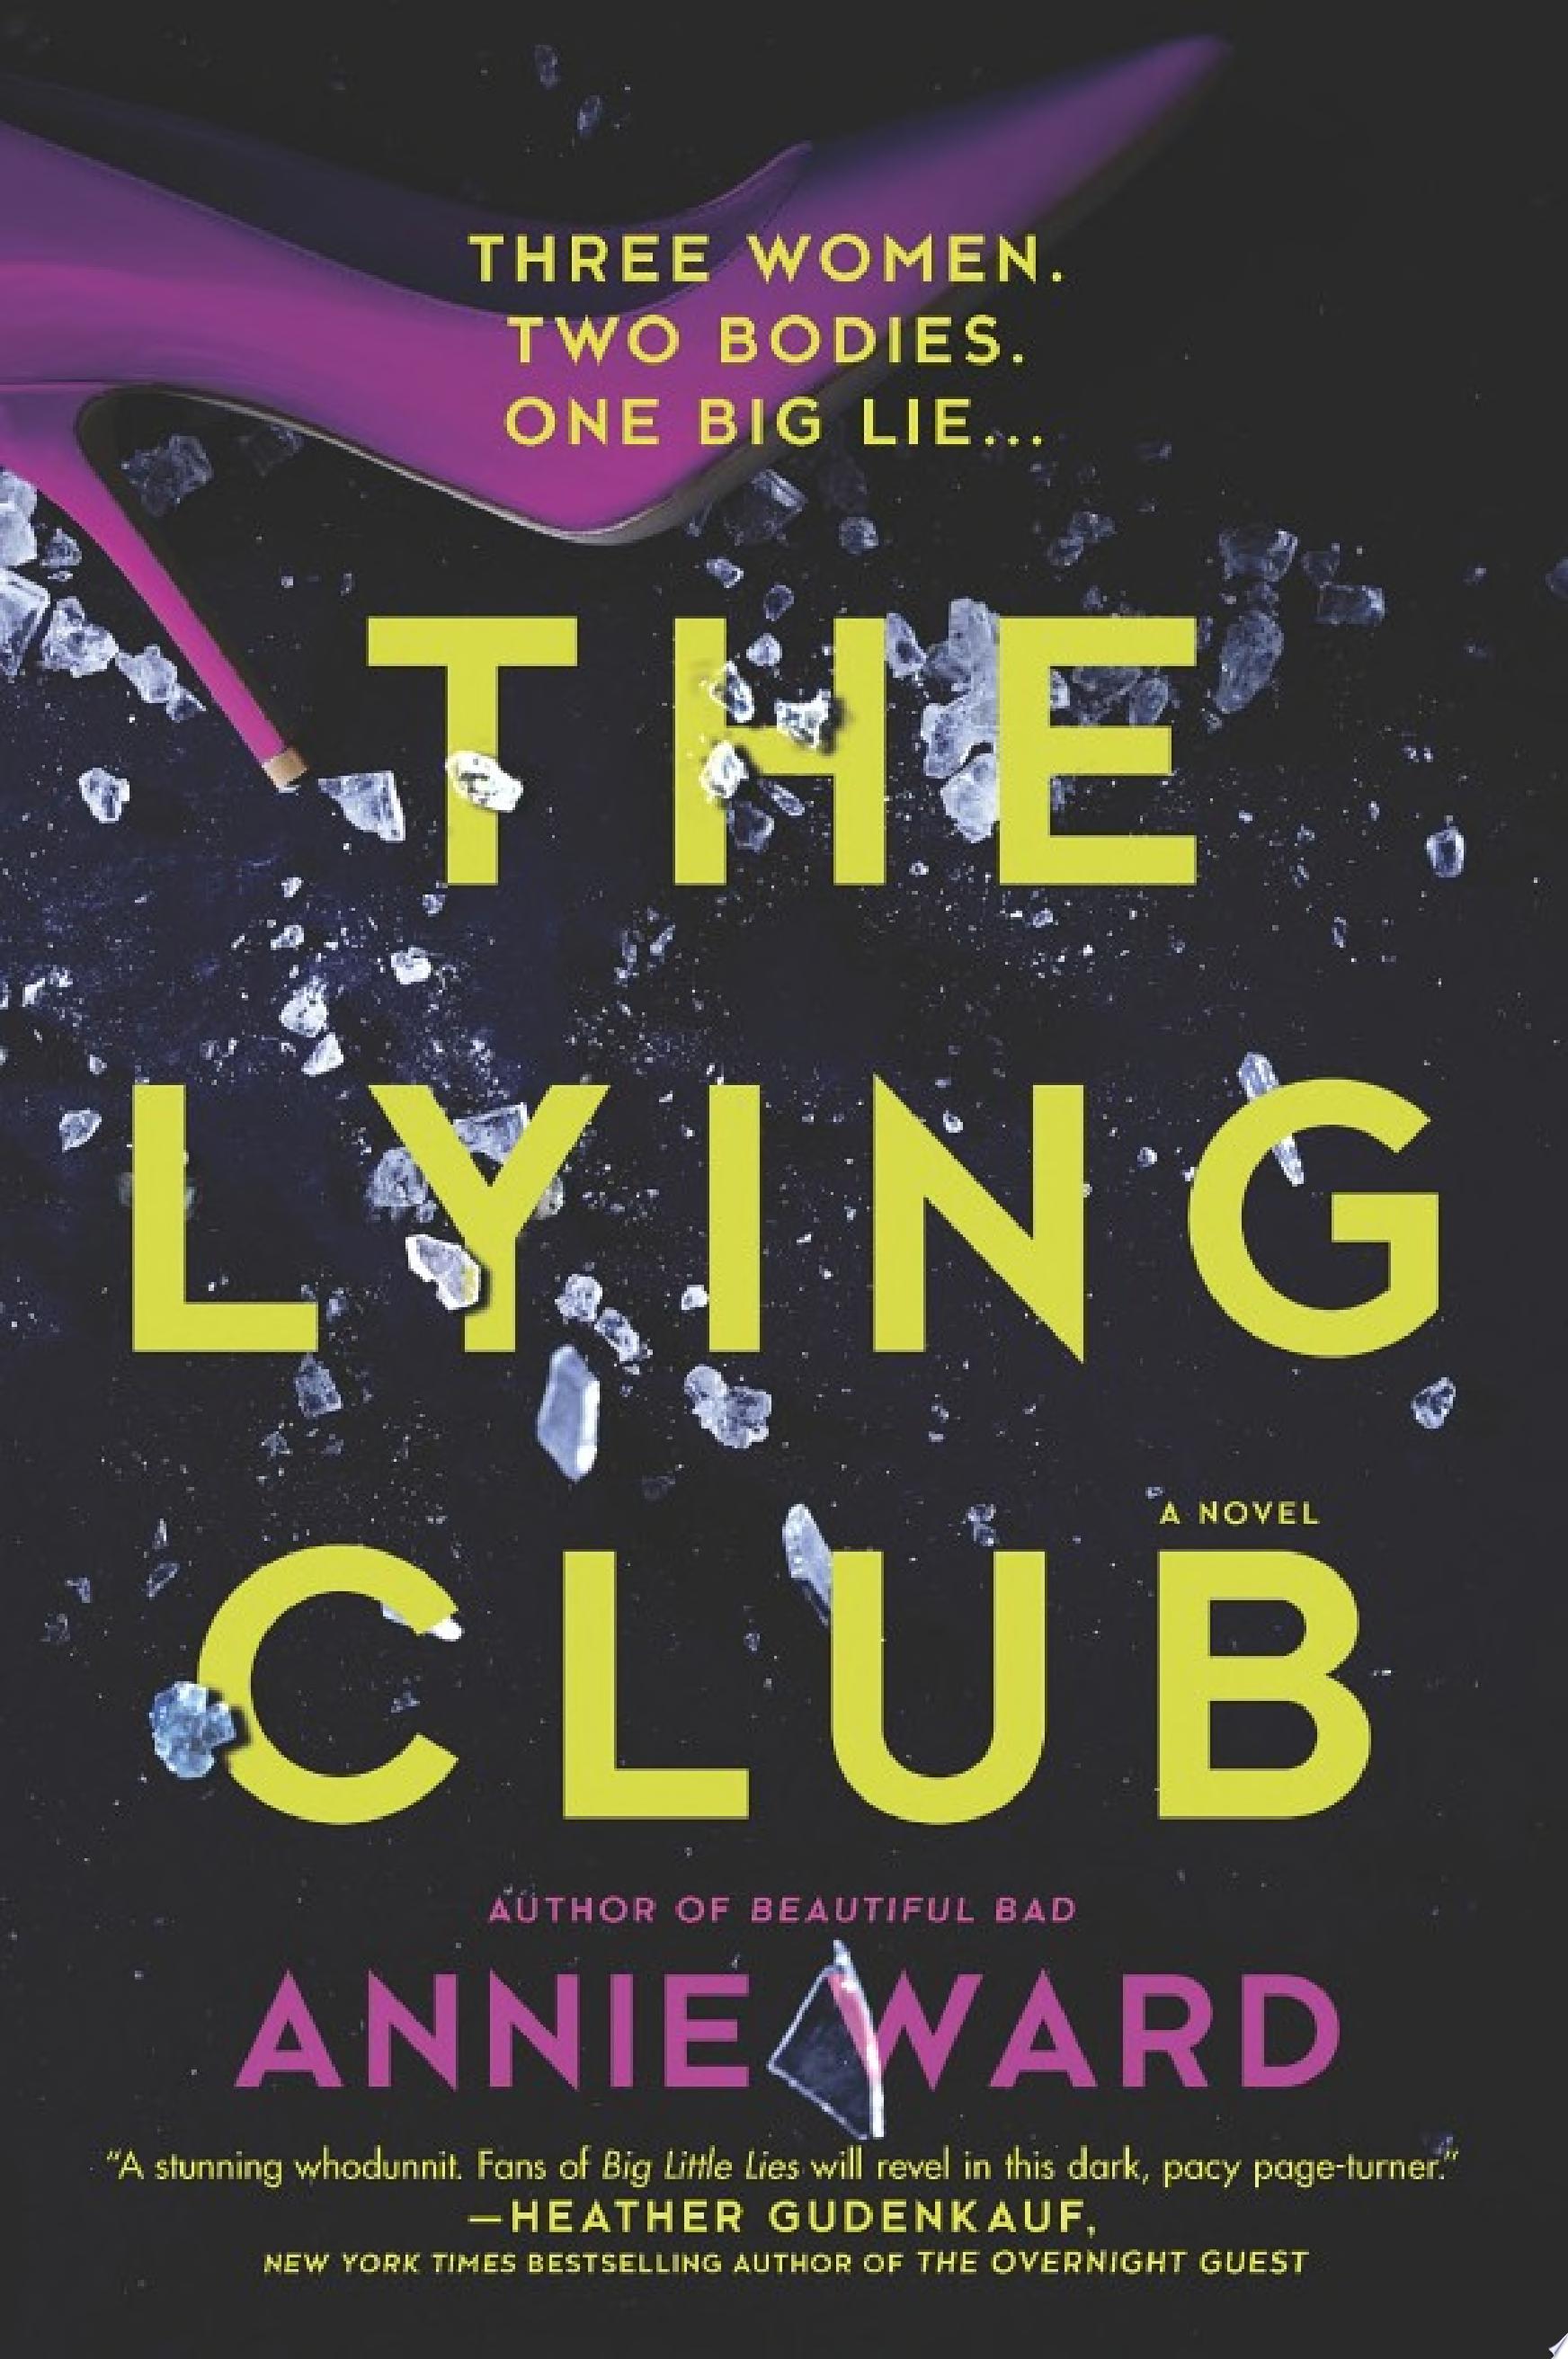 Image for "The Lying Club"